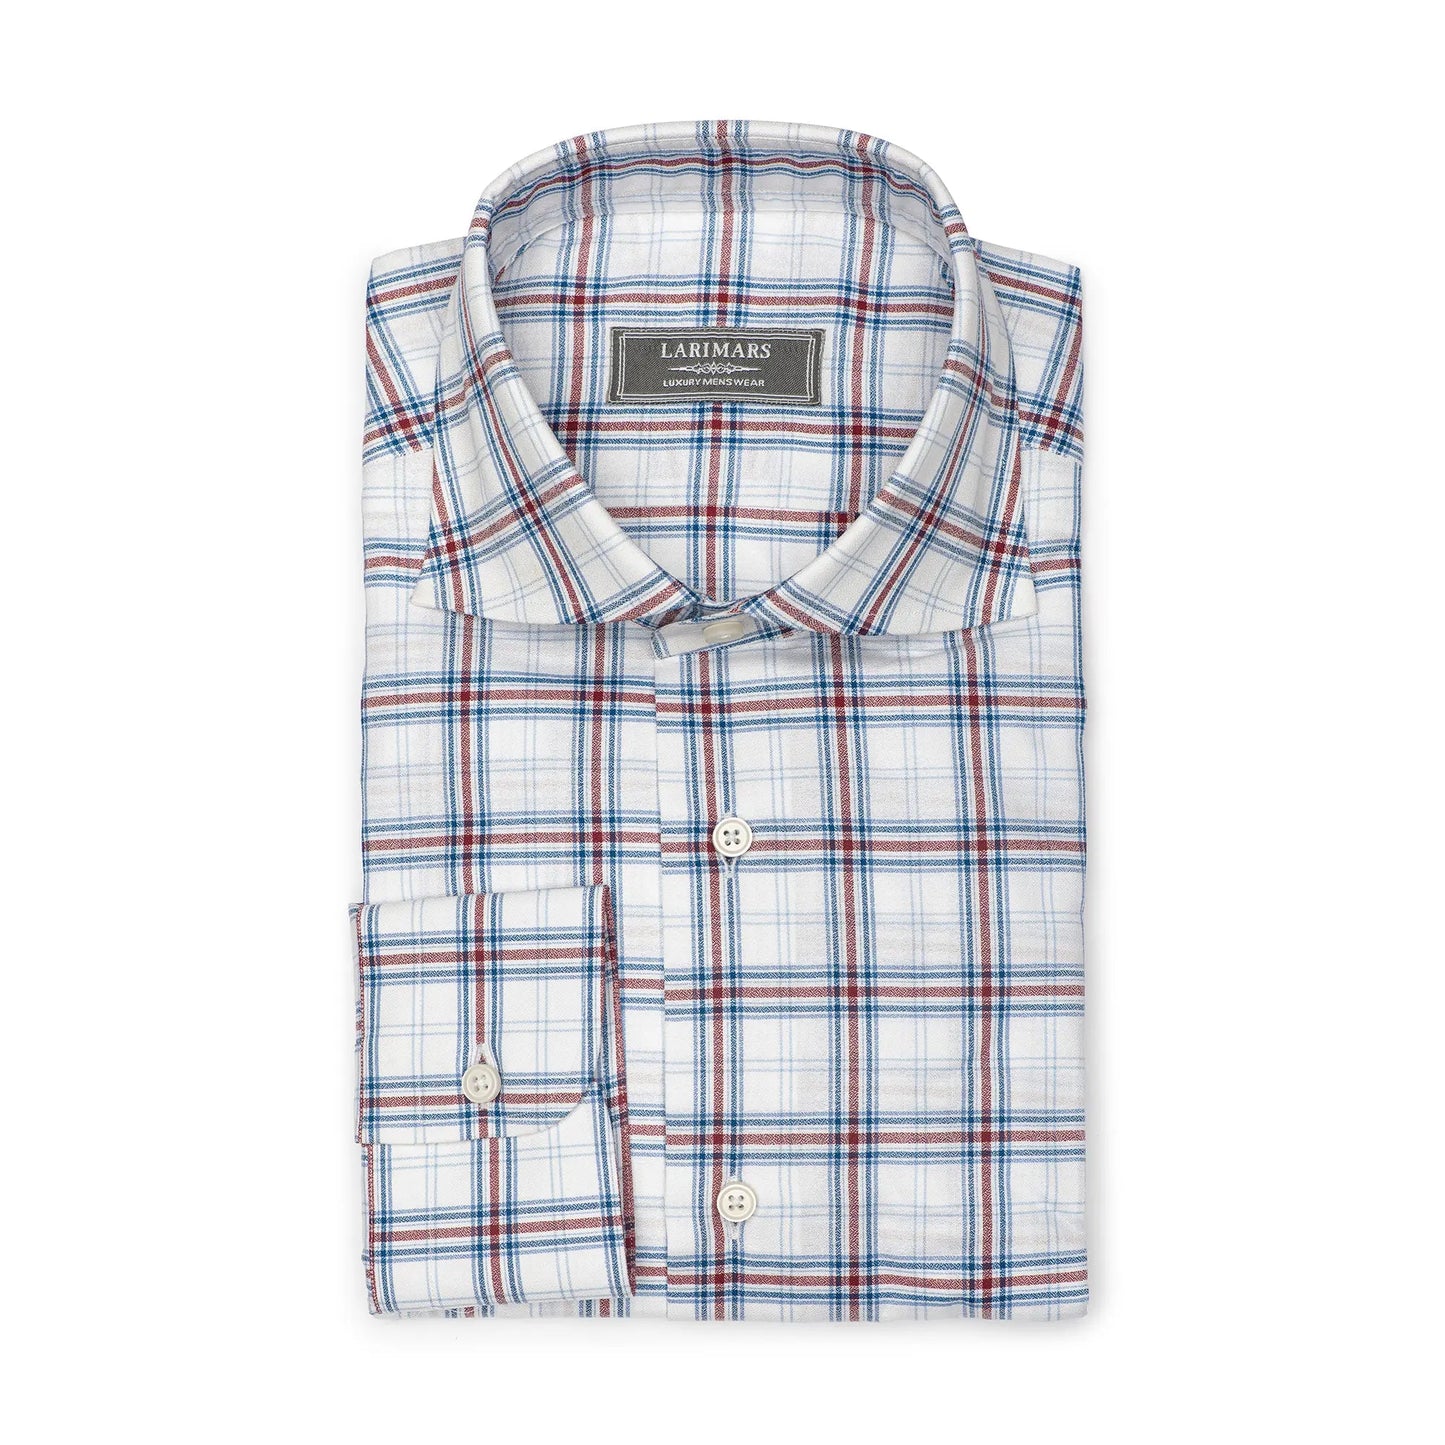 Blue & Red Big Check - Larimars Clothing Men's Formal and casual wear shirts